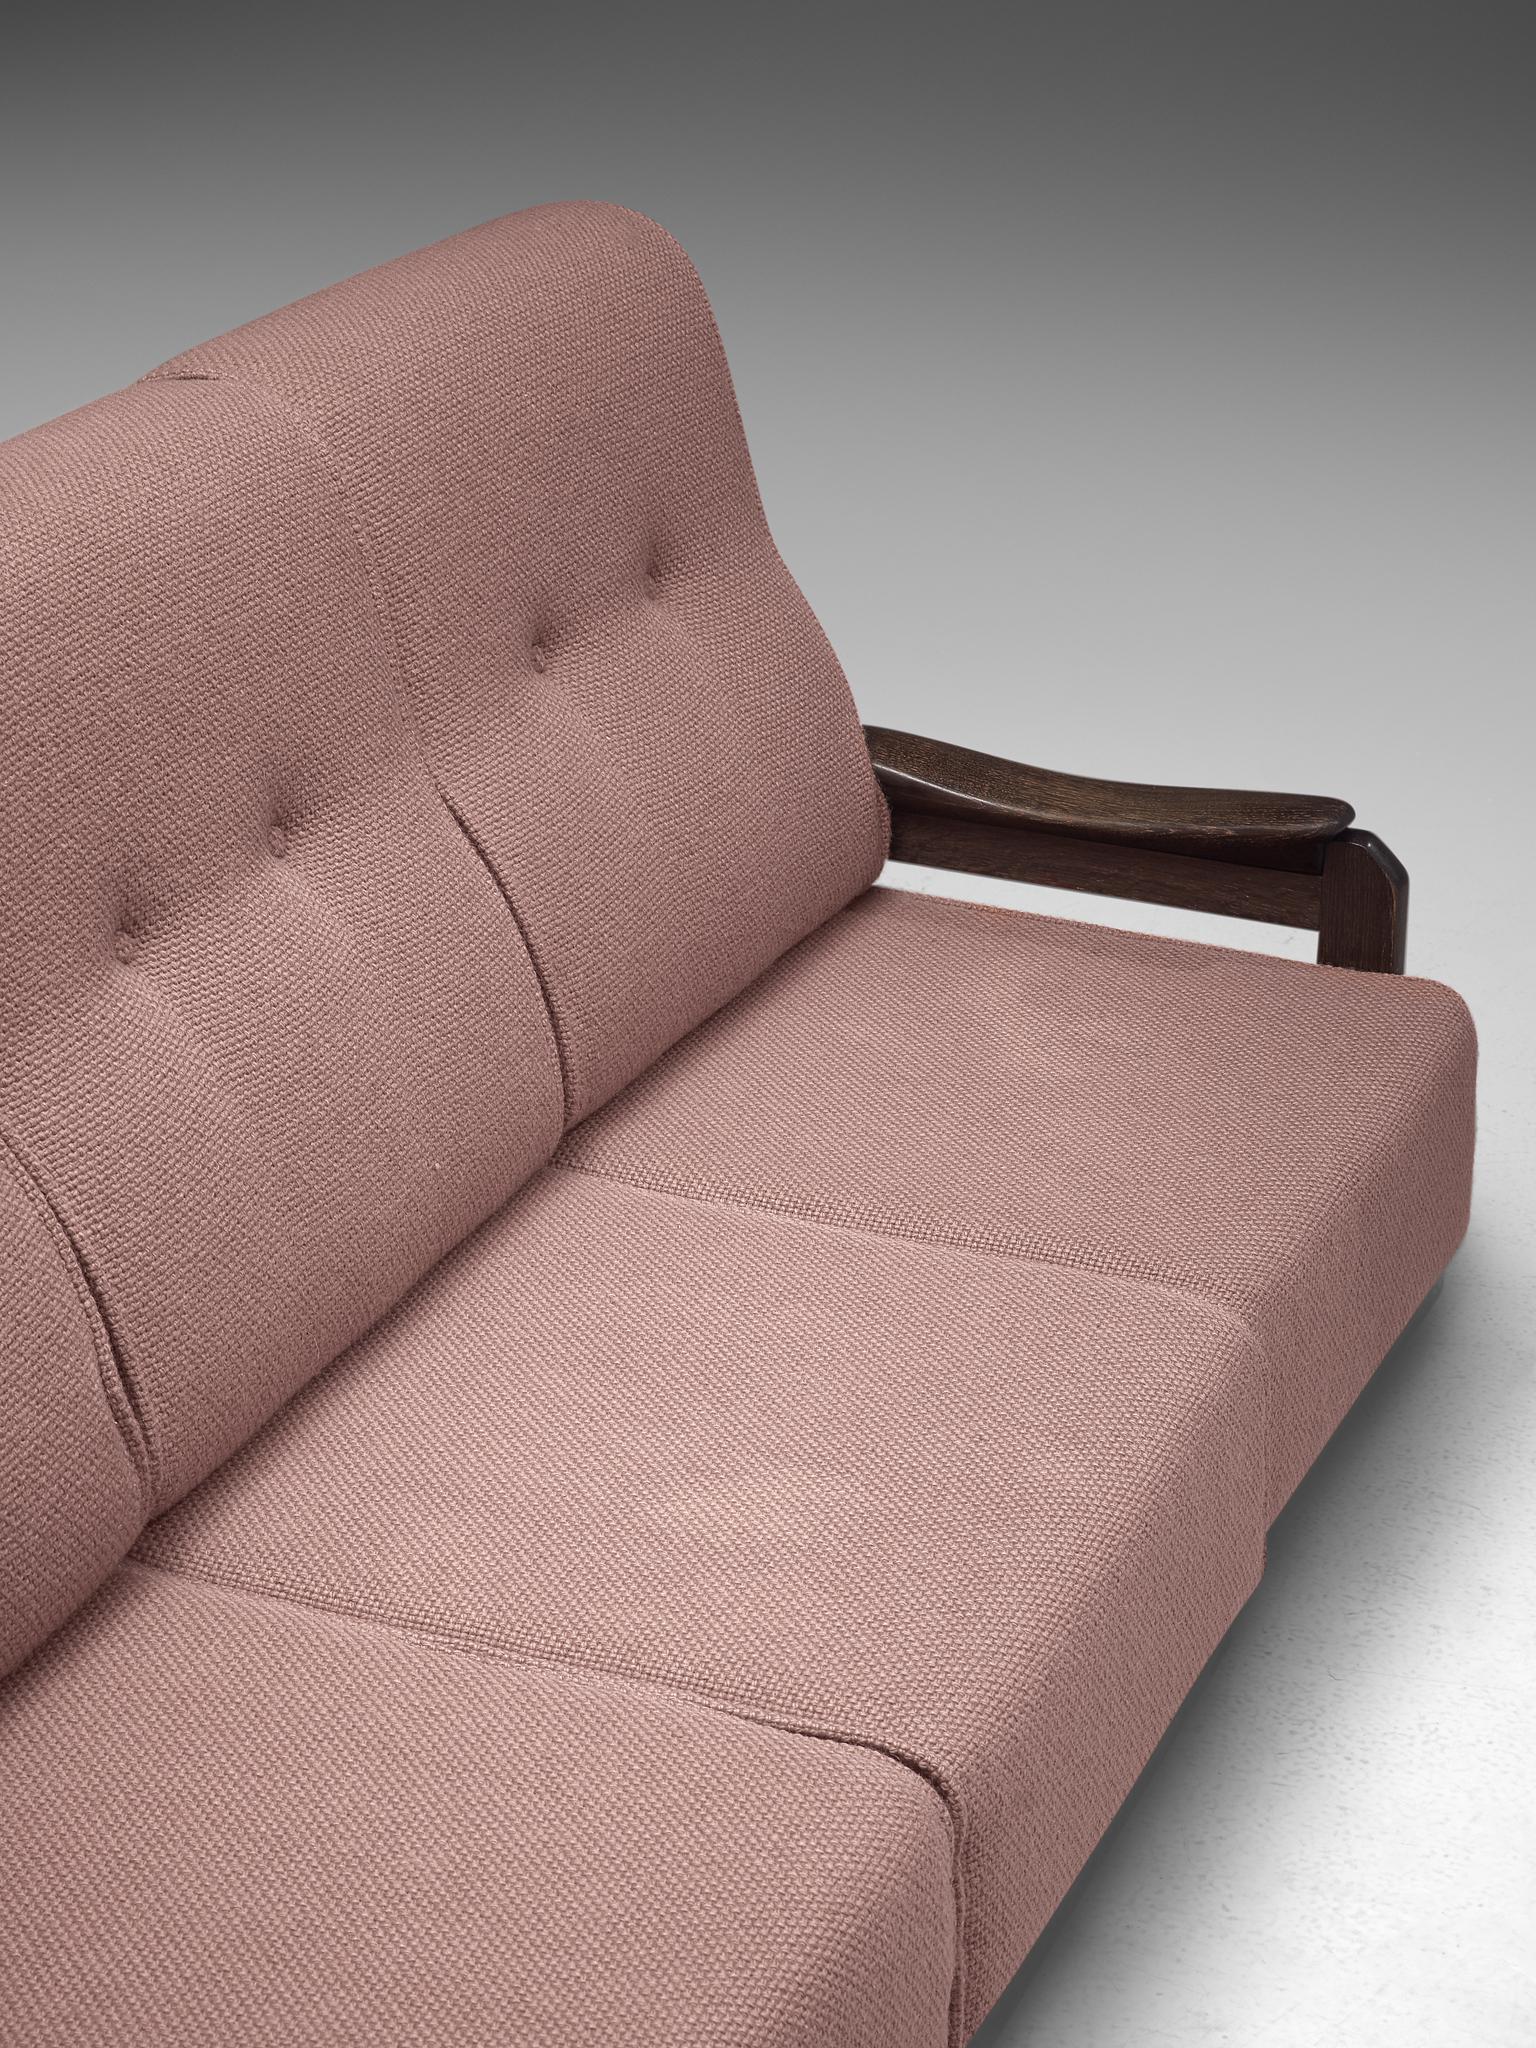 Mid-20th Century Guillerme et Chambron Sectional Sofa 'Elmyre' in Pink Fabric